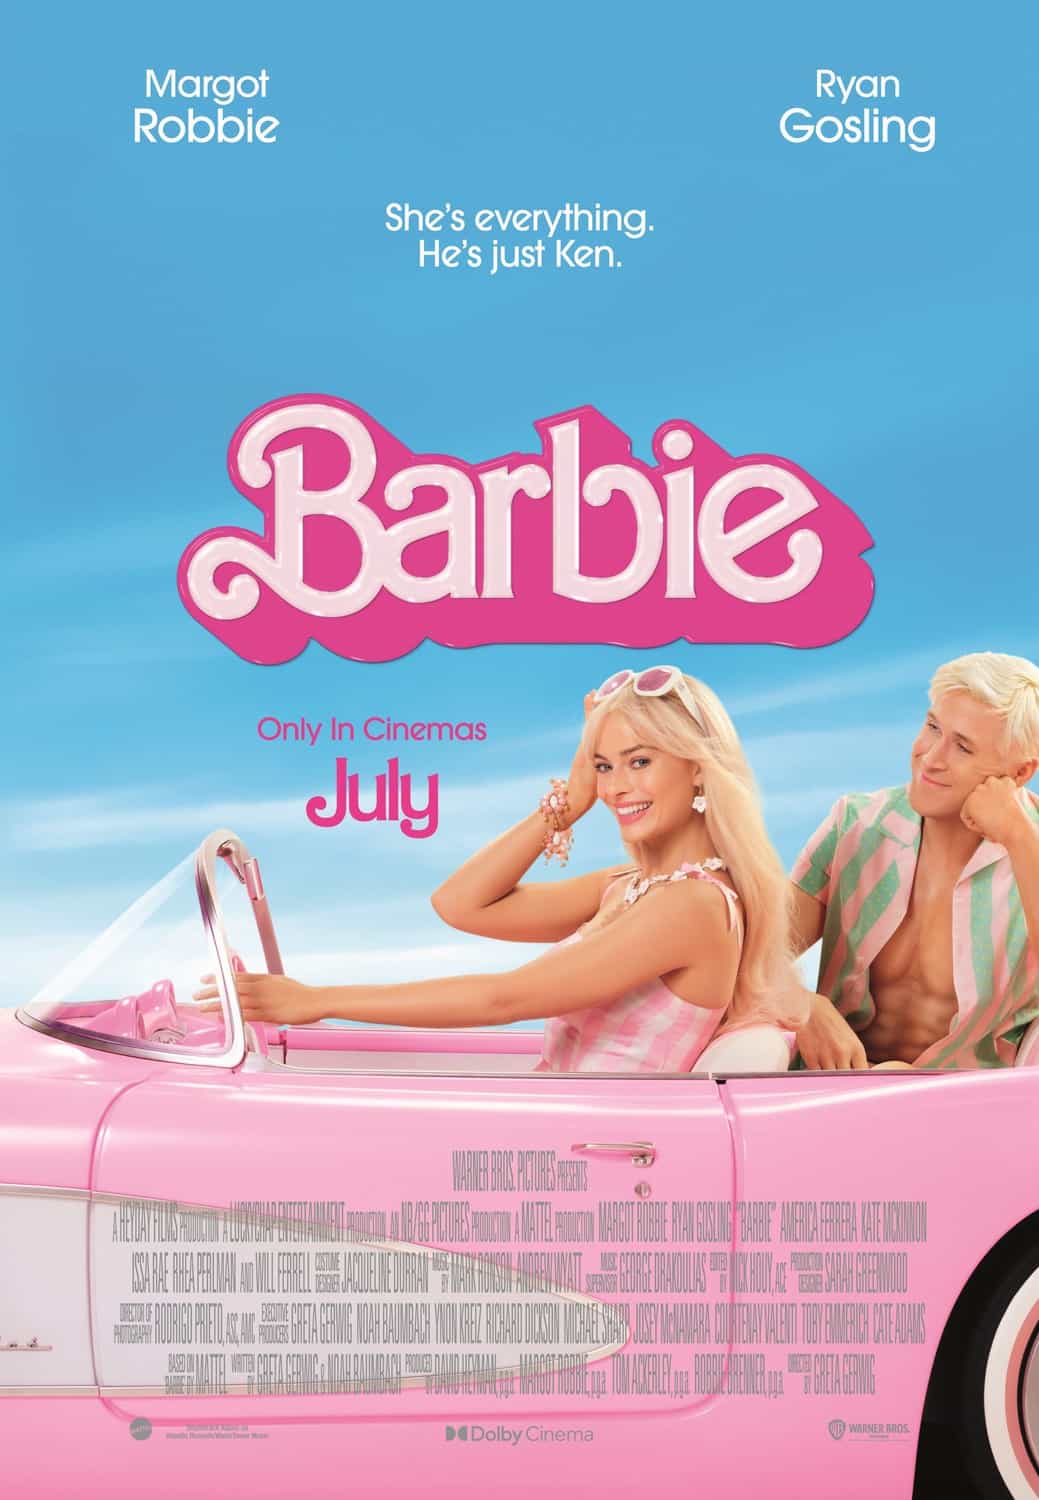 US Box Office Weekend Report 21st - 23rd July 2023:  Barbie beats Oppenheimer to the top of the US box office with a $162 Million debut gross